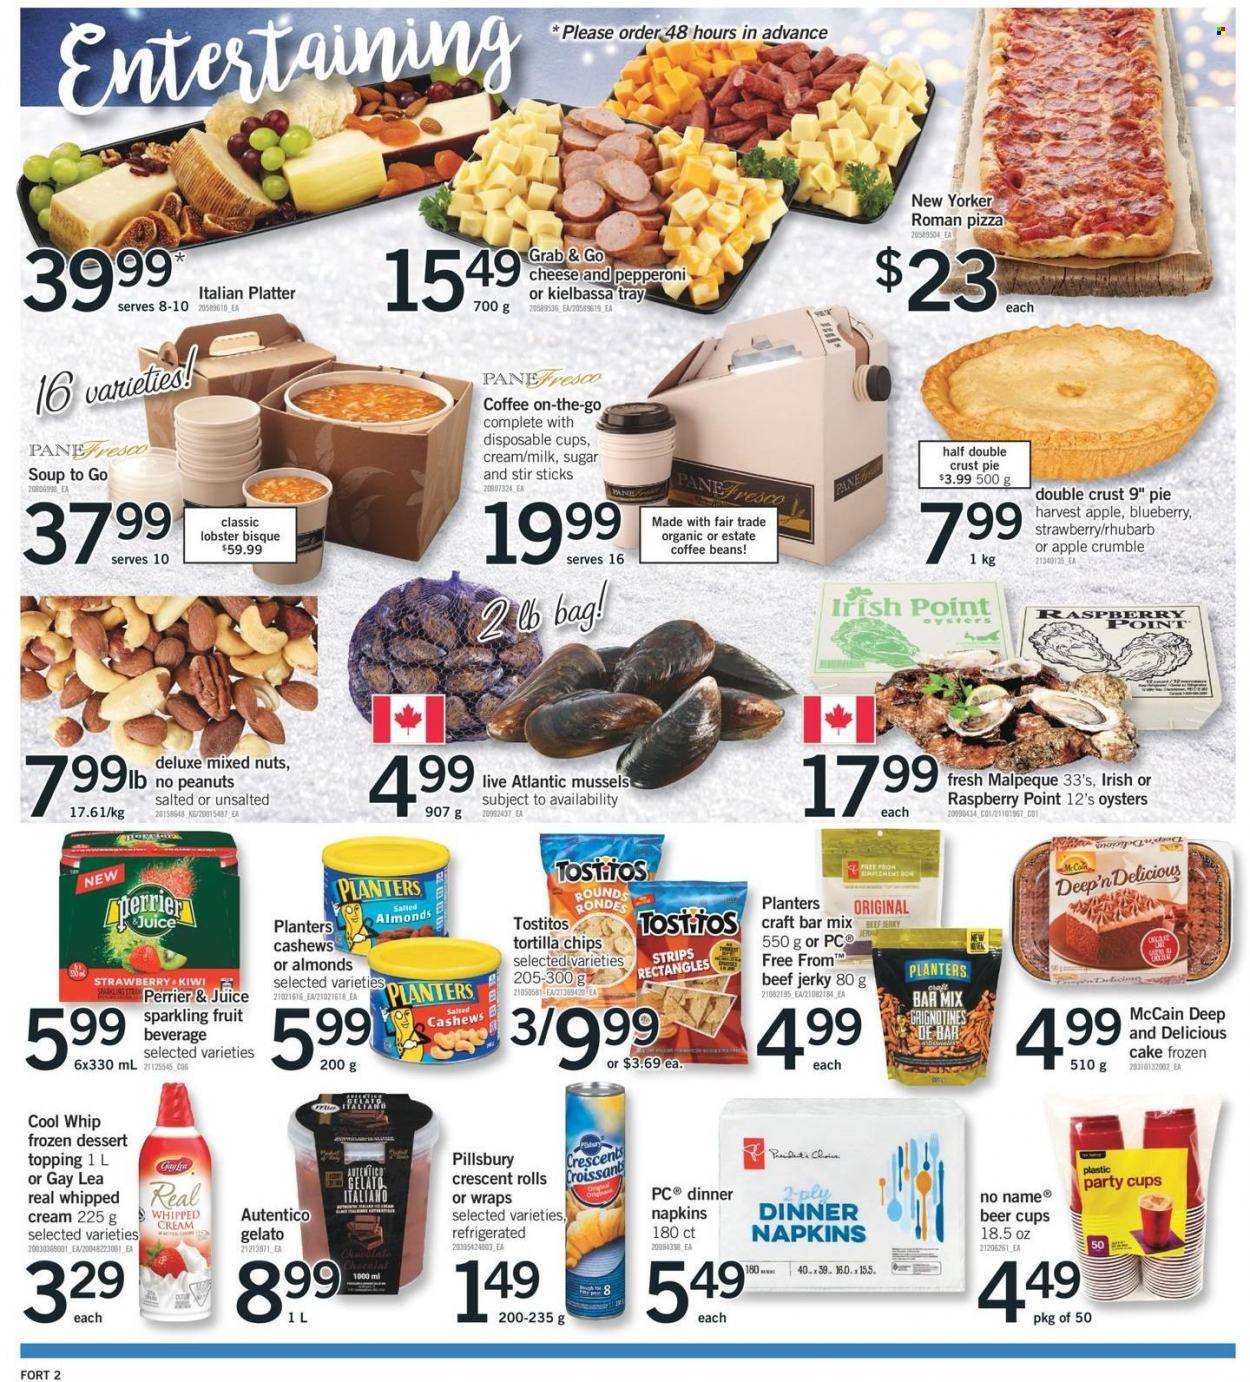 thumbnail - Fortinos Flyer - December 30, 2021 - January 05, 2022 - Sales products - cake, croissant, wraps, crescent rolls, rhubarb, lobster, mussels, oysters, No Name, pizza, soup, Pillsbury, beef jerky, jerky, pepperoni, milk, Cool Whip, whipped cream, gelato, strips, McCain, tortilla chips, Tostitos, topping, almonds, cashews, peanuts, mixed nuts, Planters, juice, Perrier, coffee beans, beer, napkins, bag, cup, party cups, kiwi. Page 3.